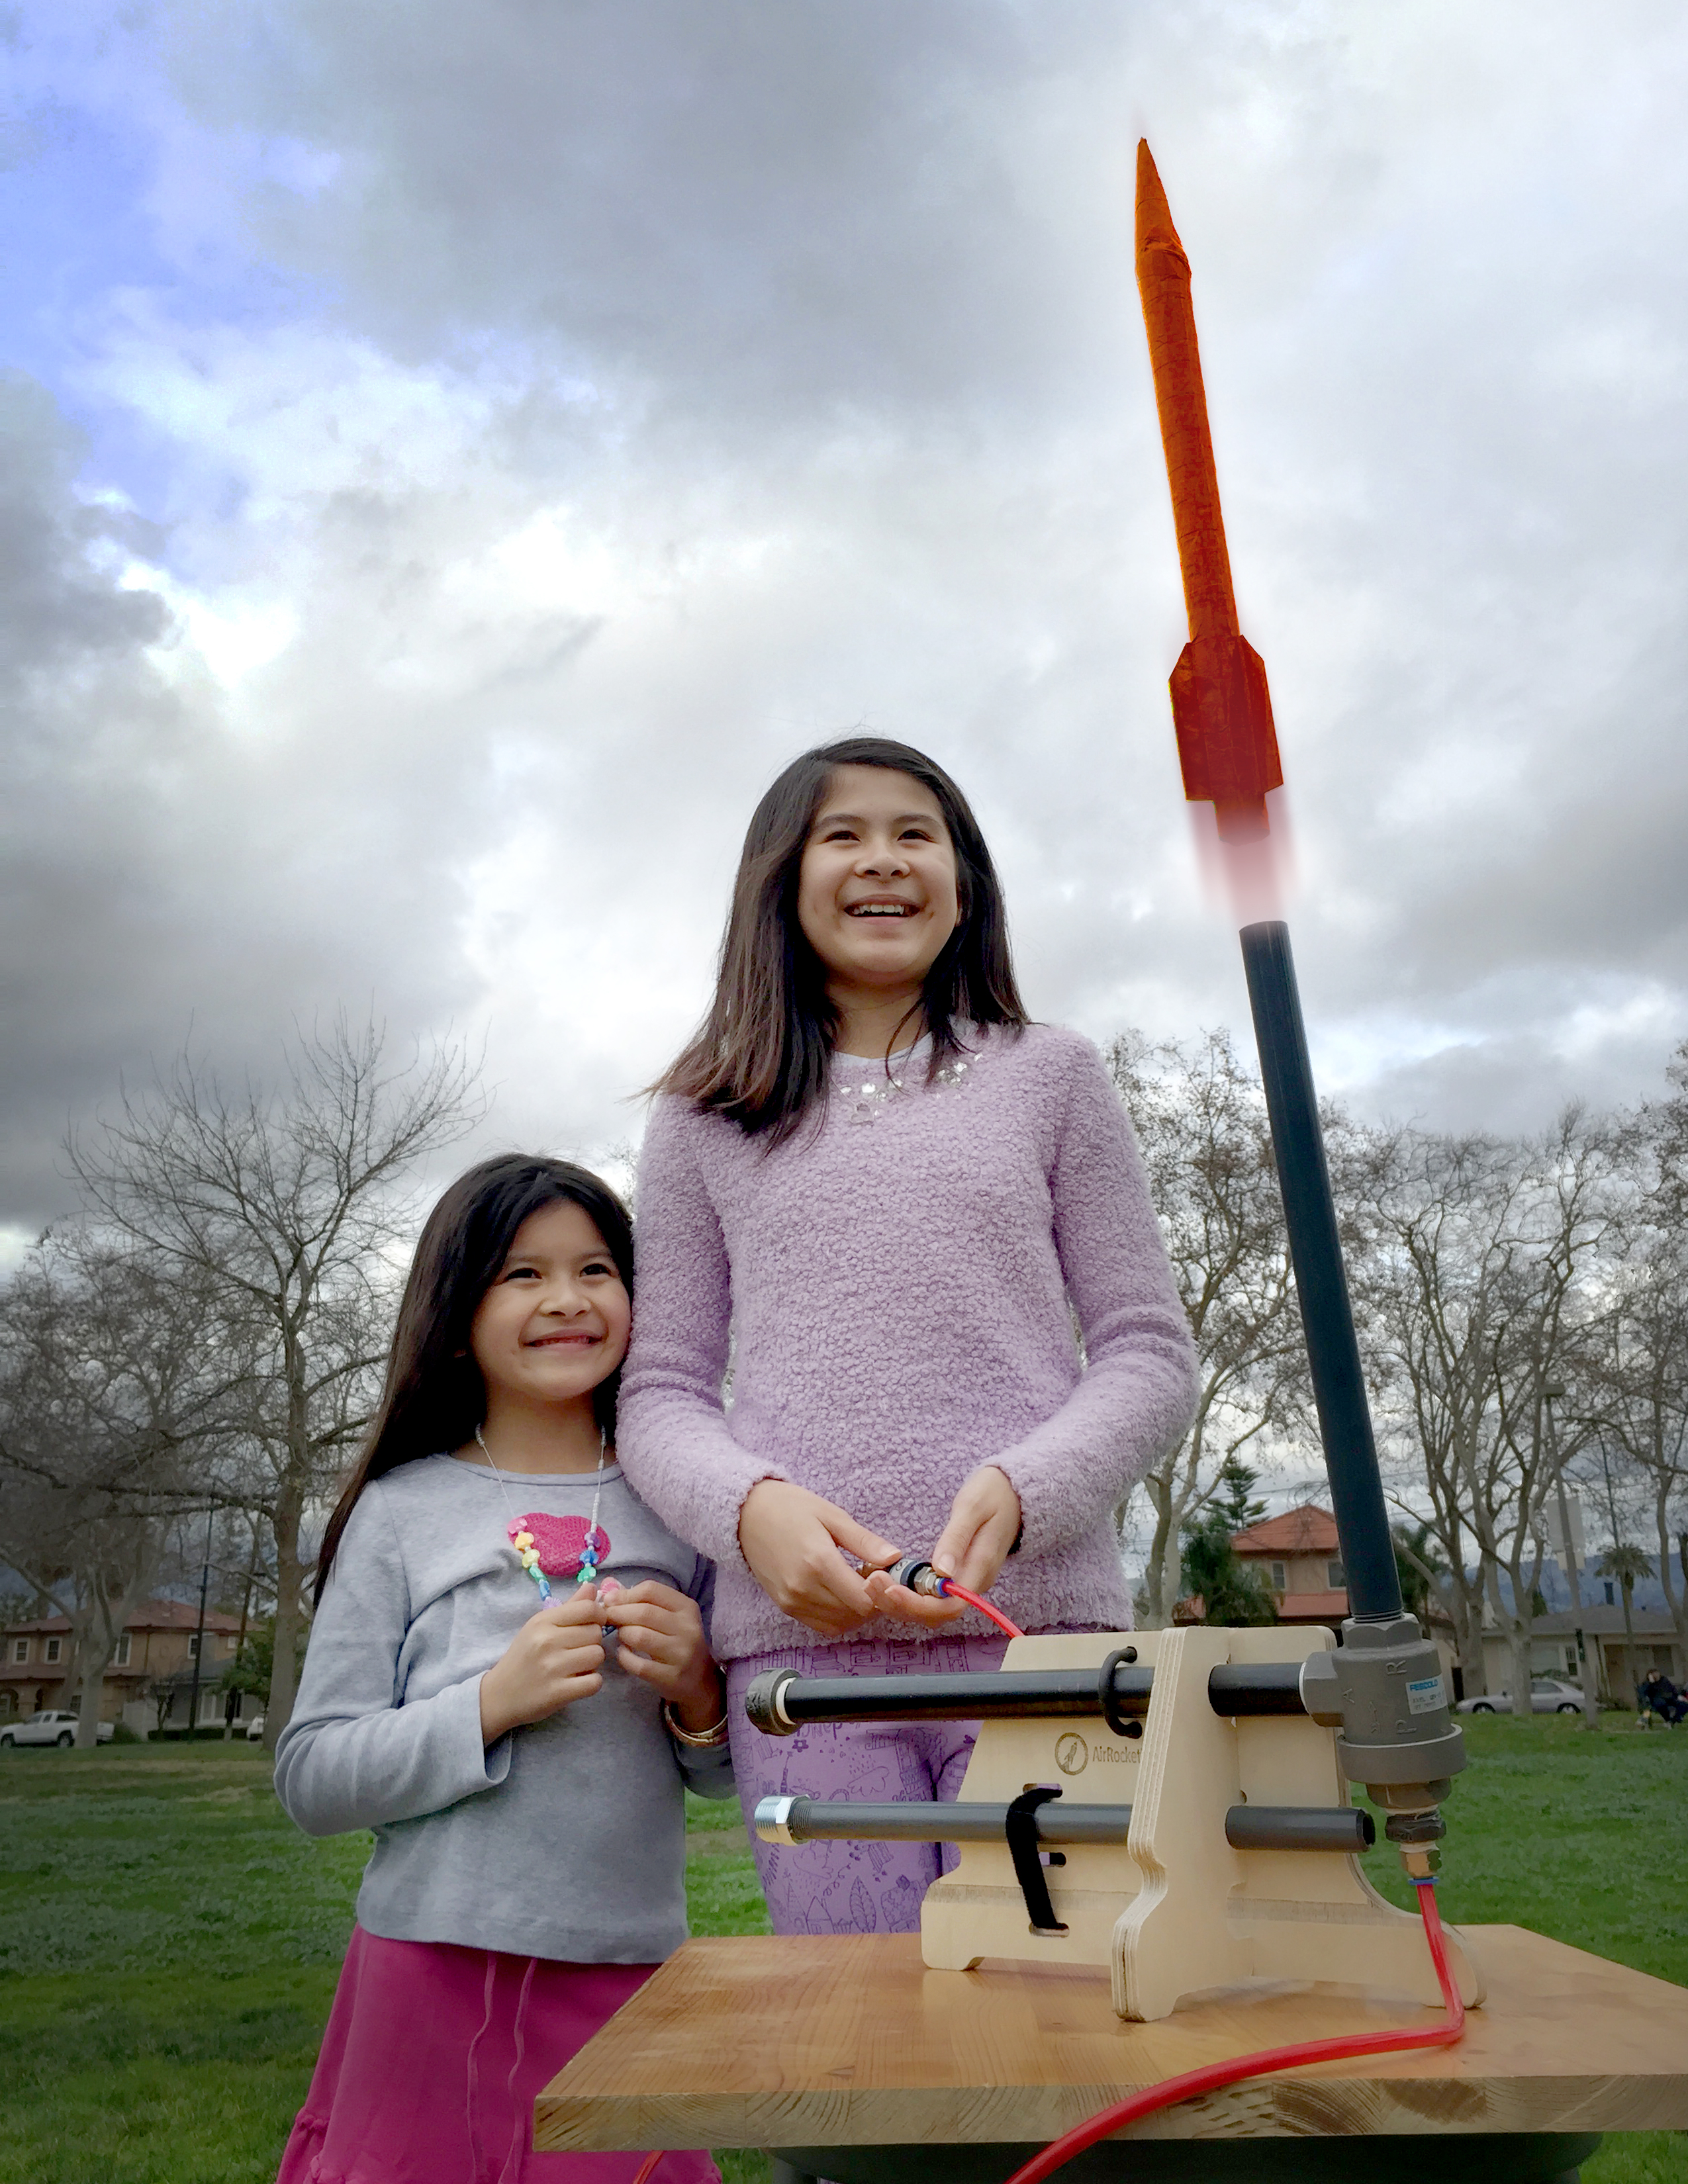 Make and Launch Compressed Air Rockets!